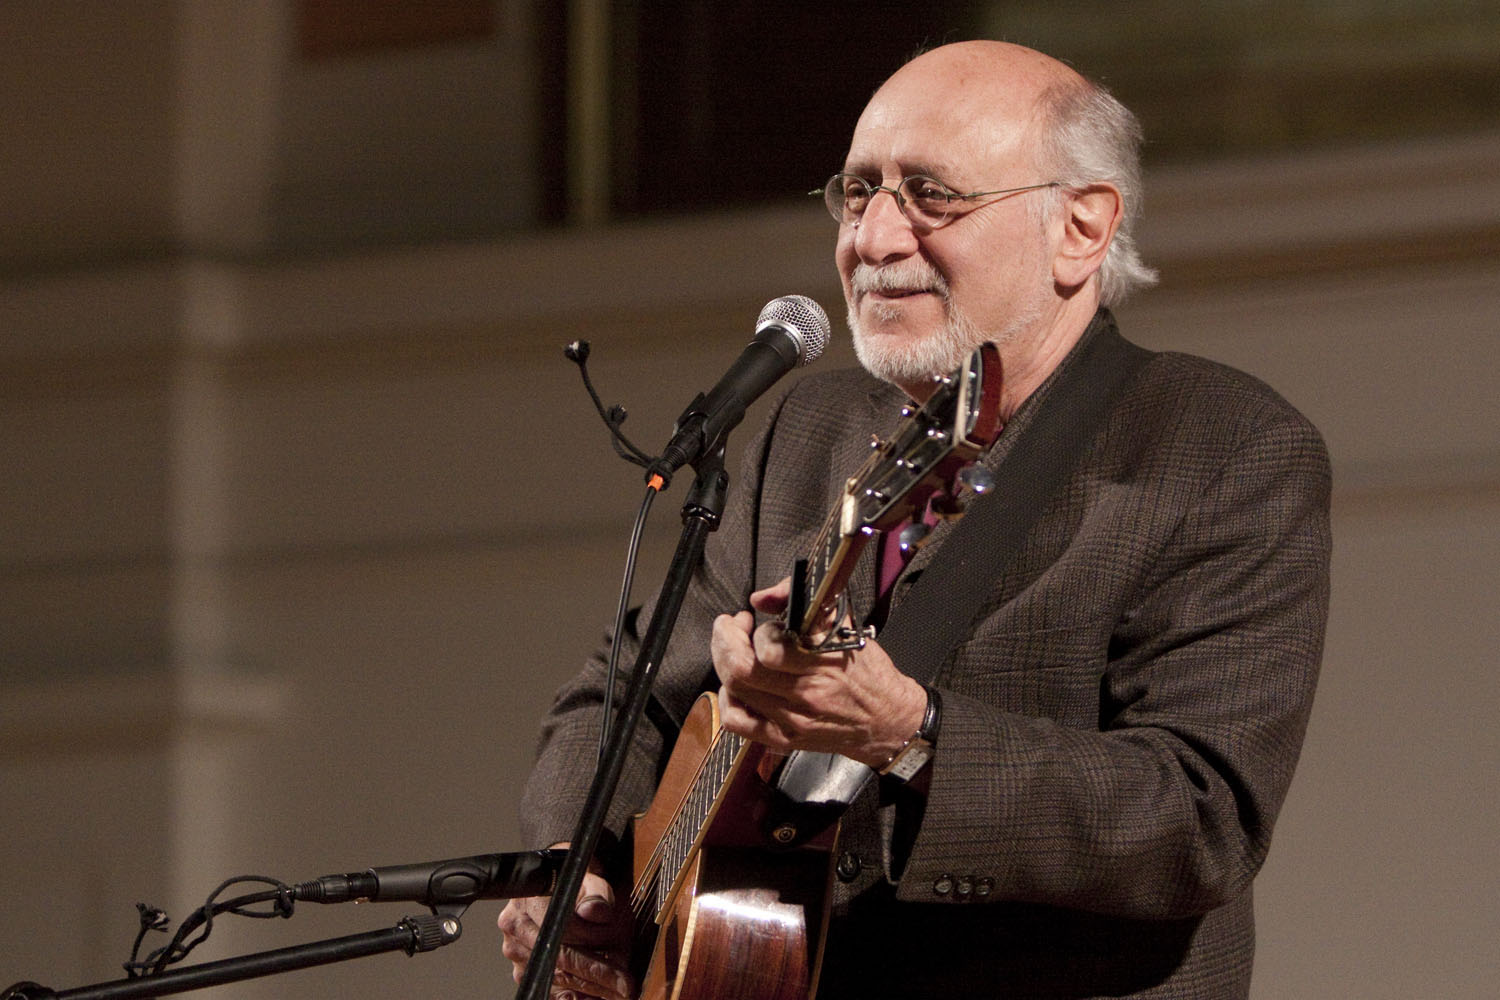 Peter Yarrow singing and playing guitar on stage